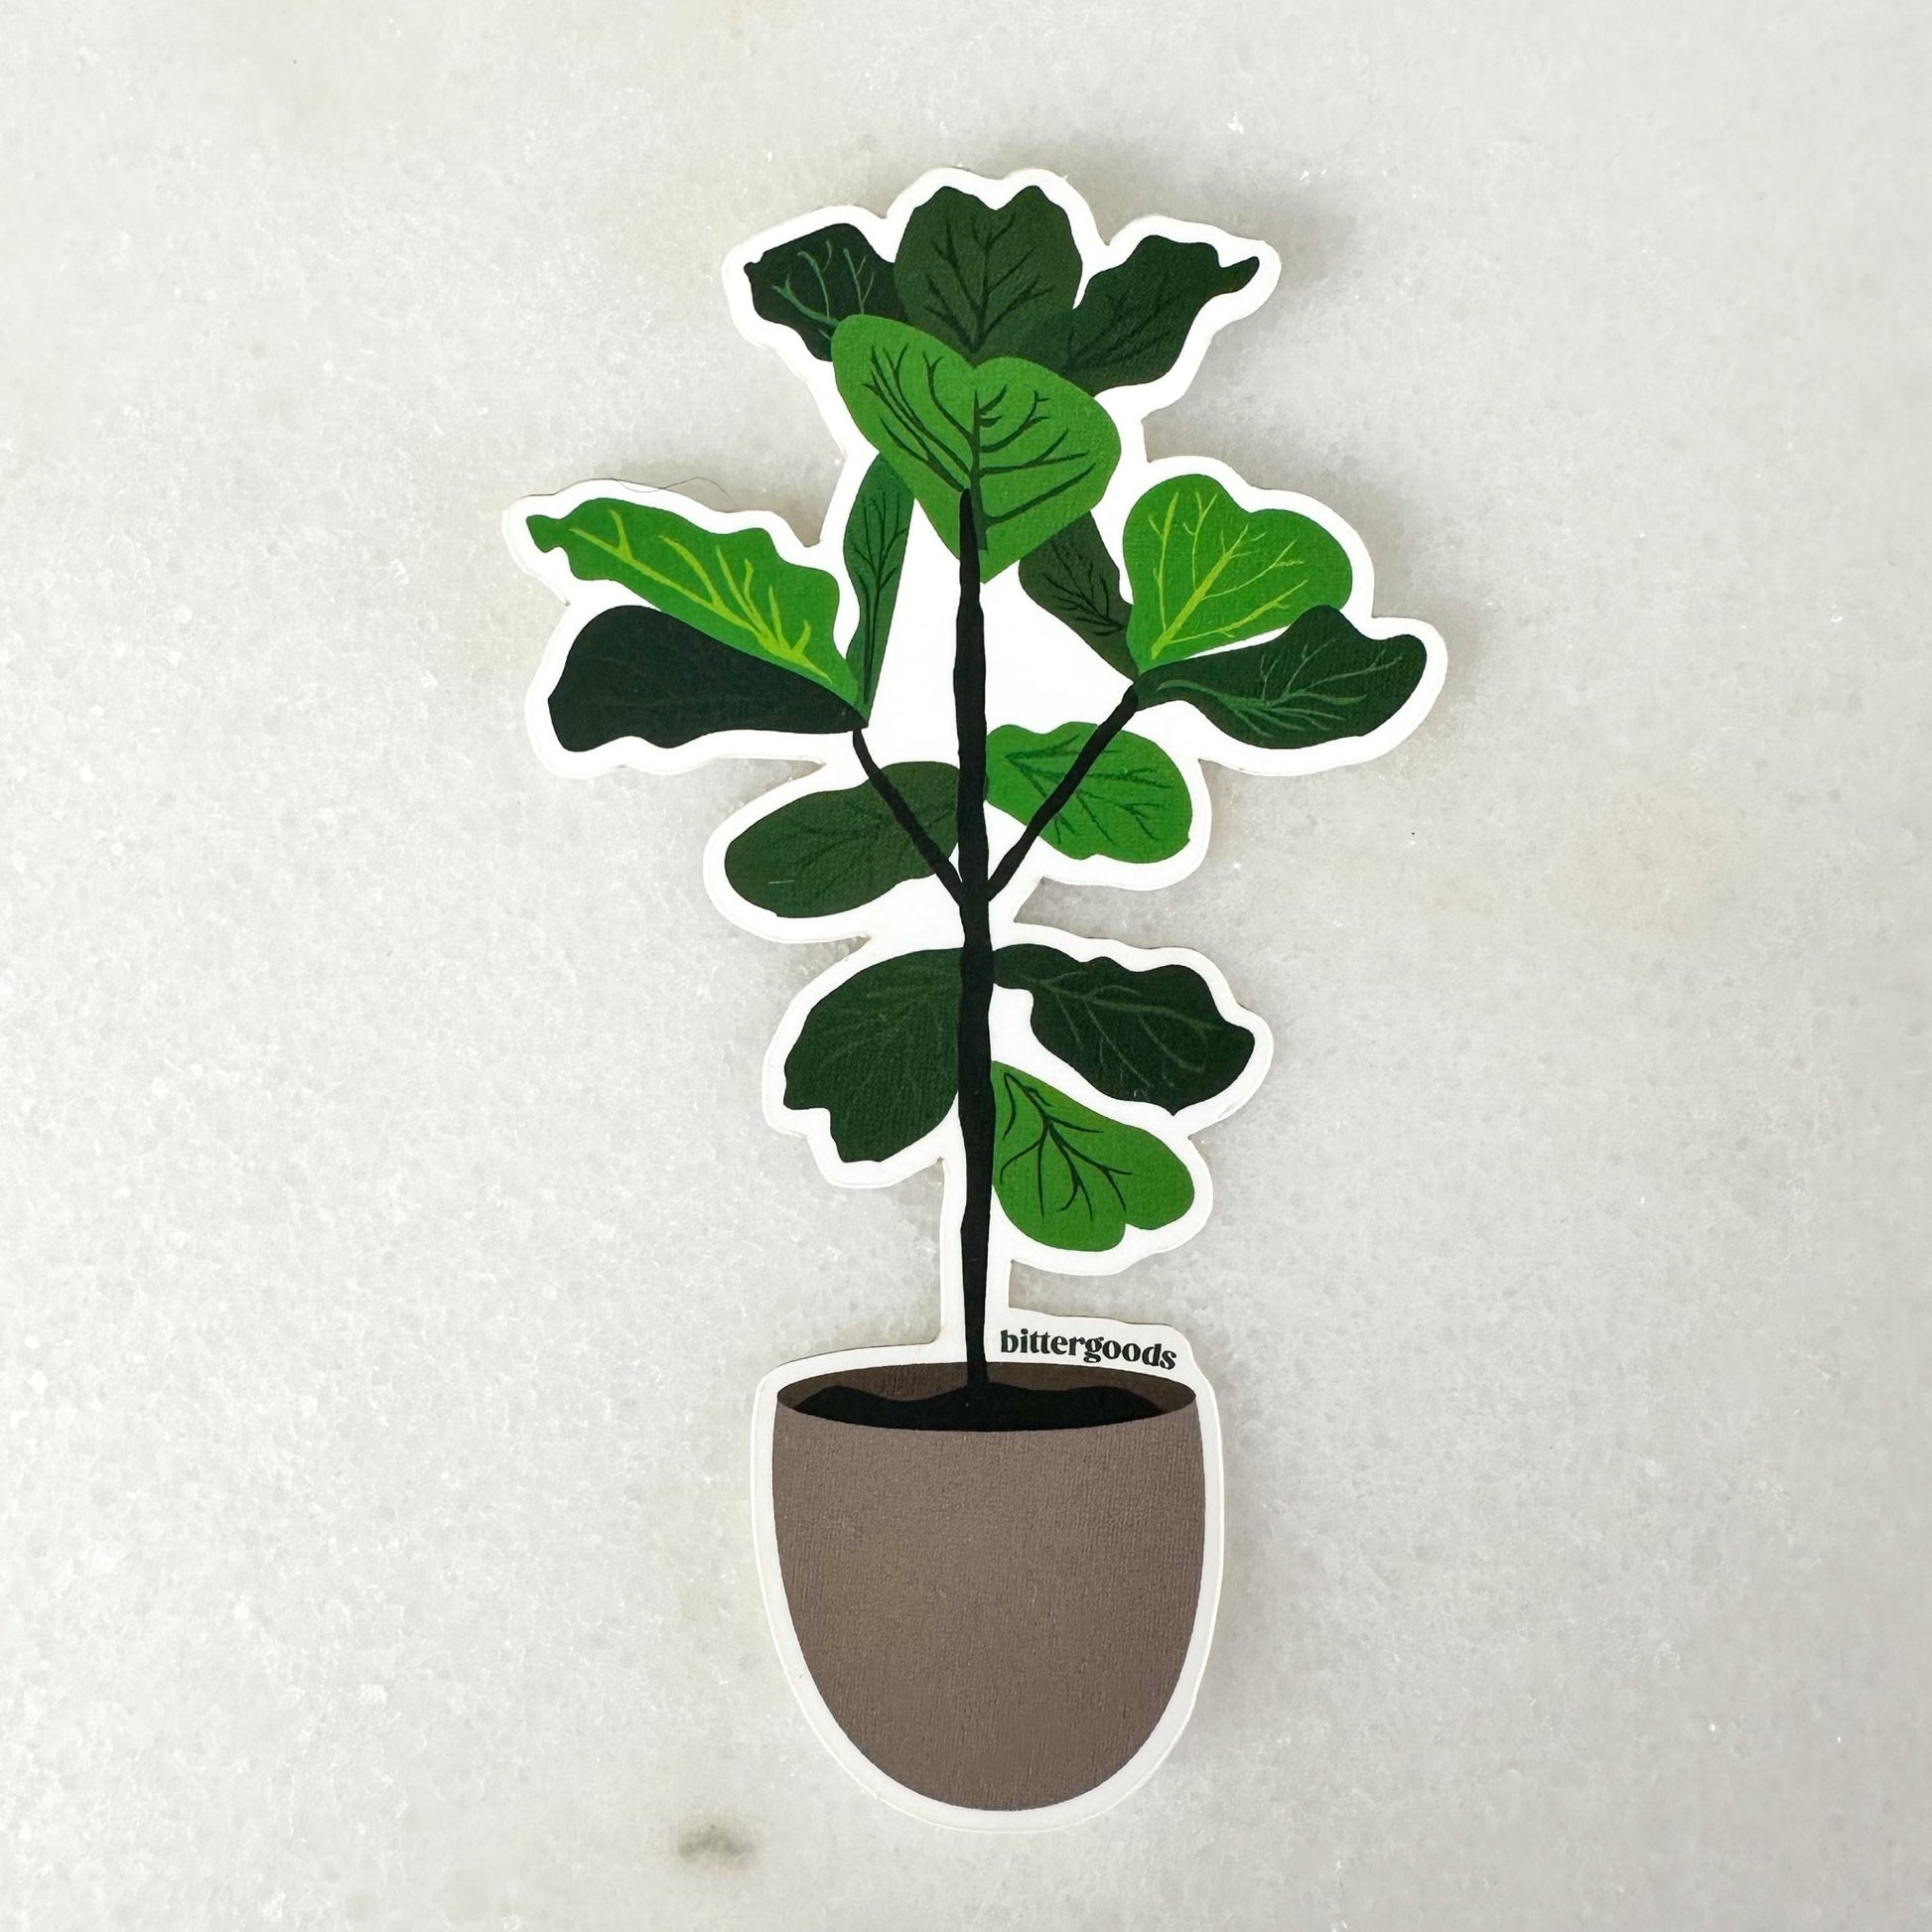 Sticker featuring a fiddle leaf fig plant